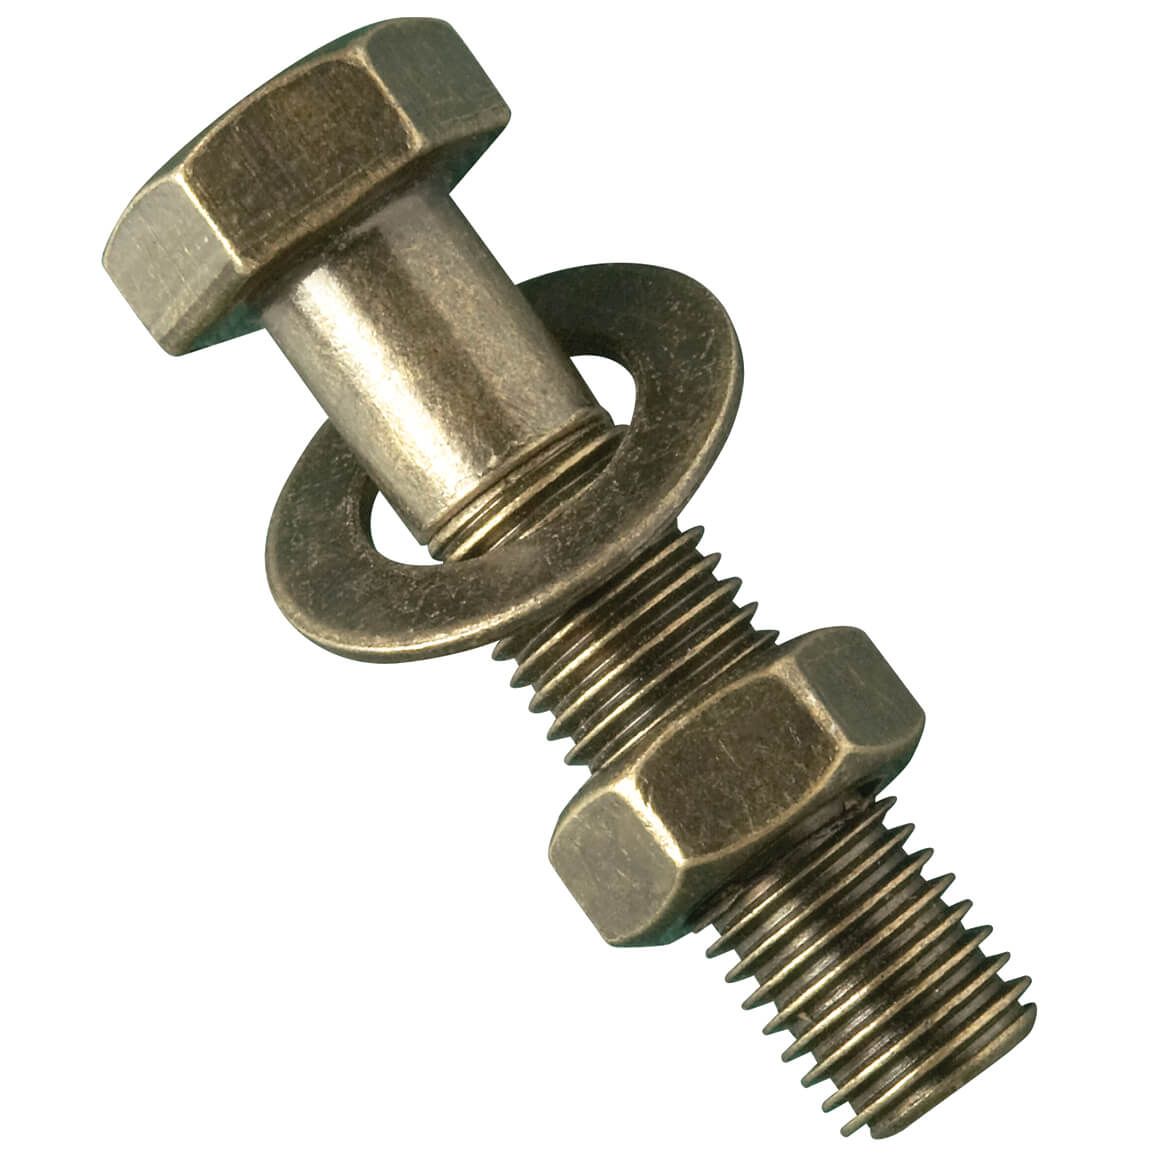 Bolt and Nut Puzzle + '-' + 375152